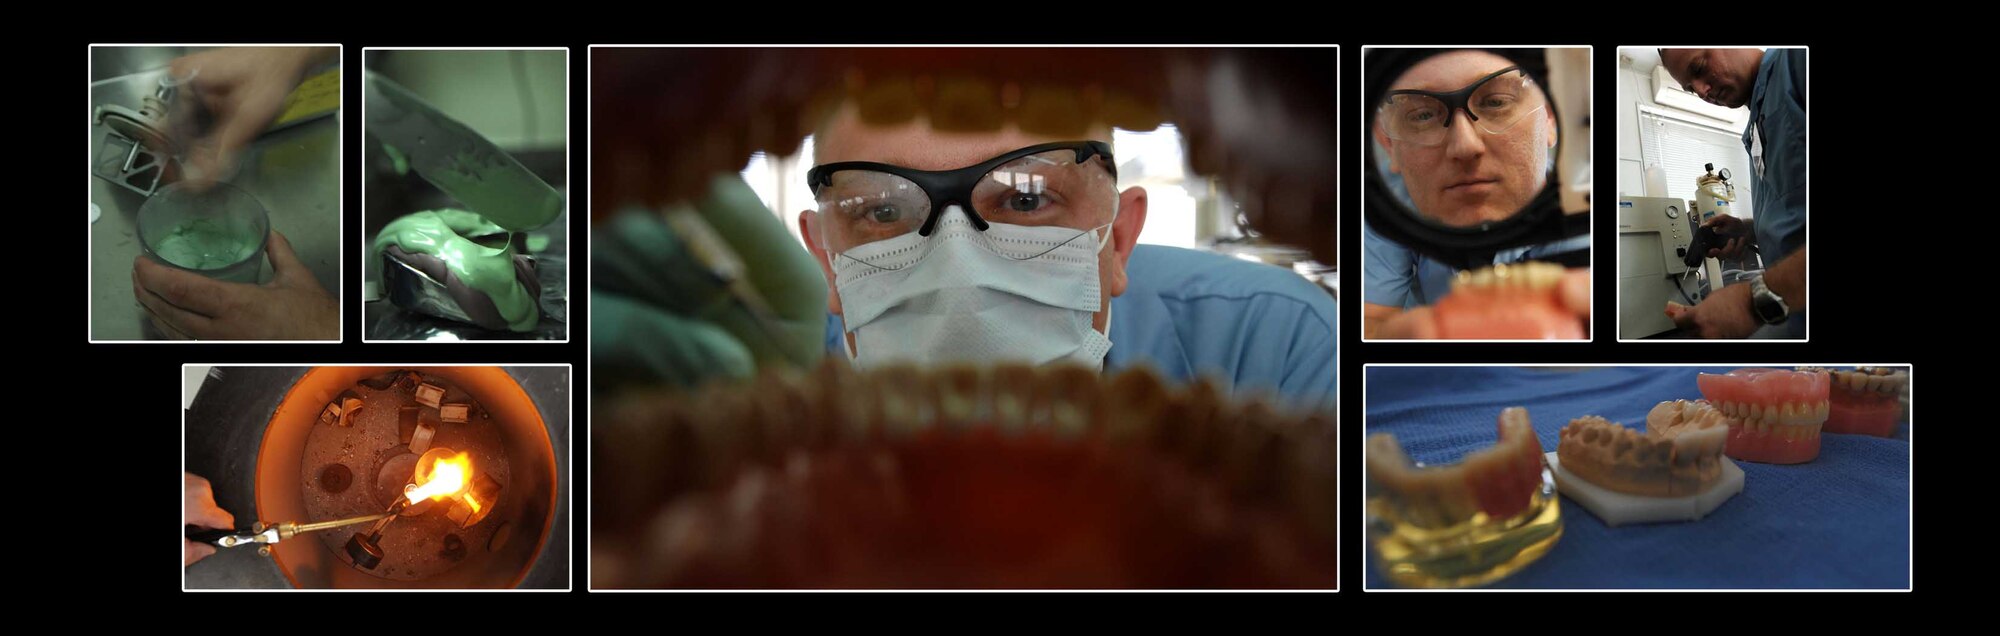 On the 26th of June 2007, SSgt Thomas Hall goes through the steps of creating dentures in the 374th Dental Squadrons dental laboratory, on Yokota Air Base. These teeth are used for any personnel that happen to need fitted replacements. (U.S. Air Force photos by A1C Laszlo Babocsi)(Released)